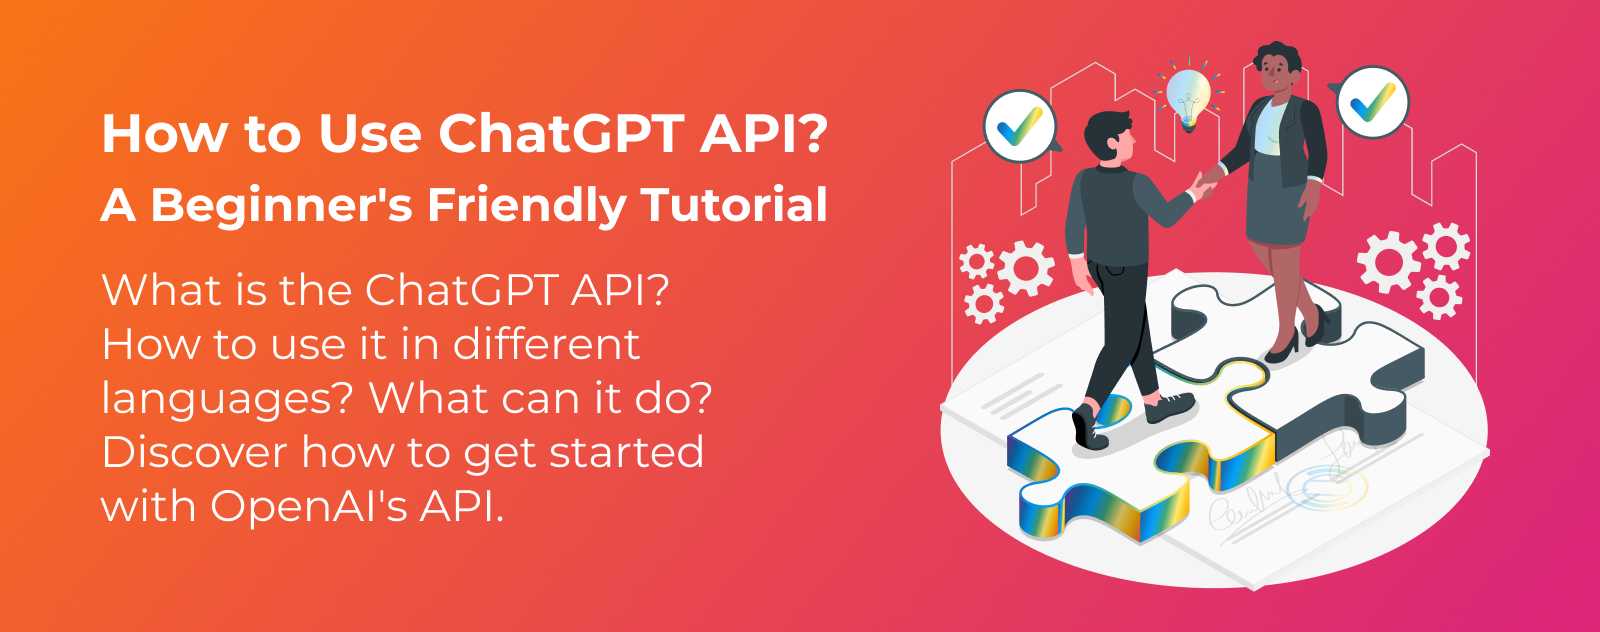 How to Use ChatGPT API? The Complete Tutorial